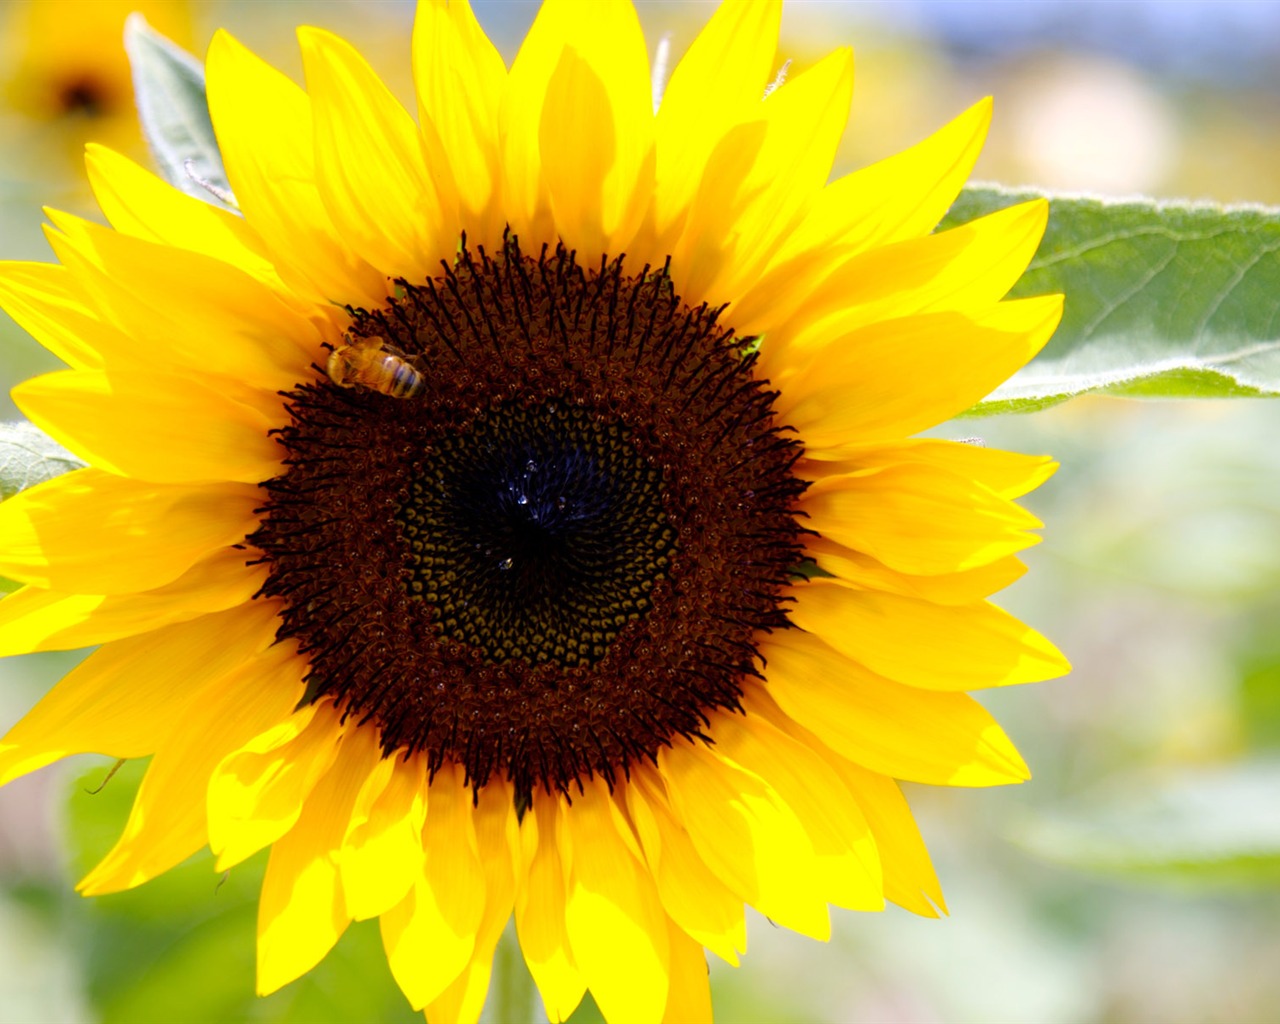 Sunny sunflower photo HD Wallpapers #22 - 1280x1024